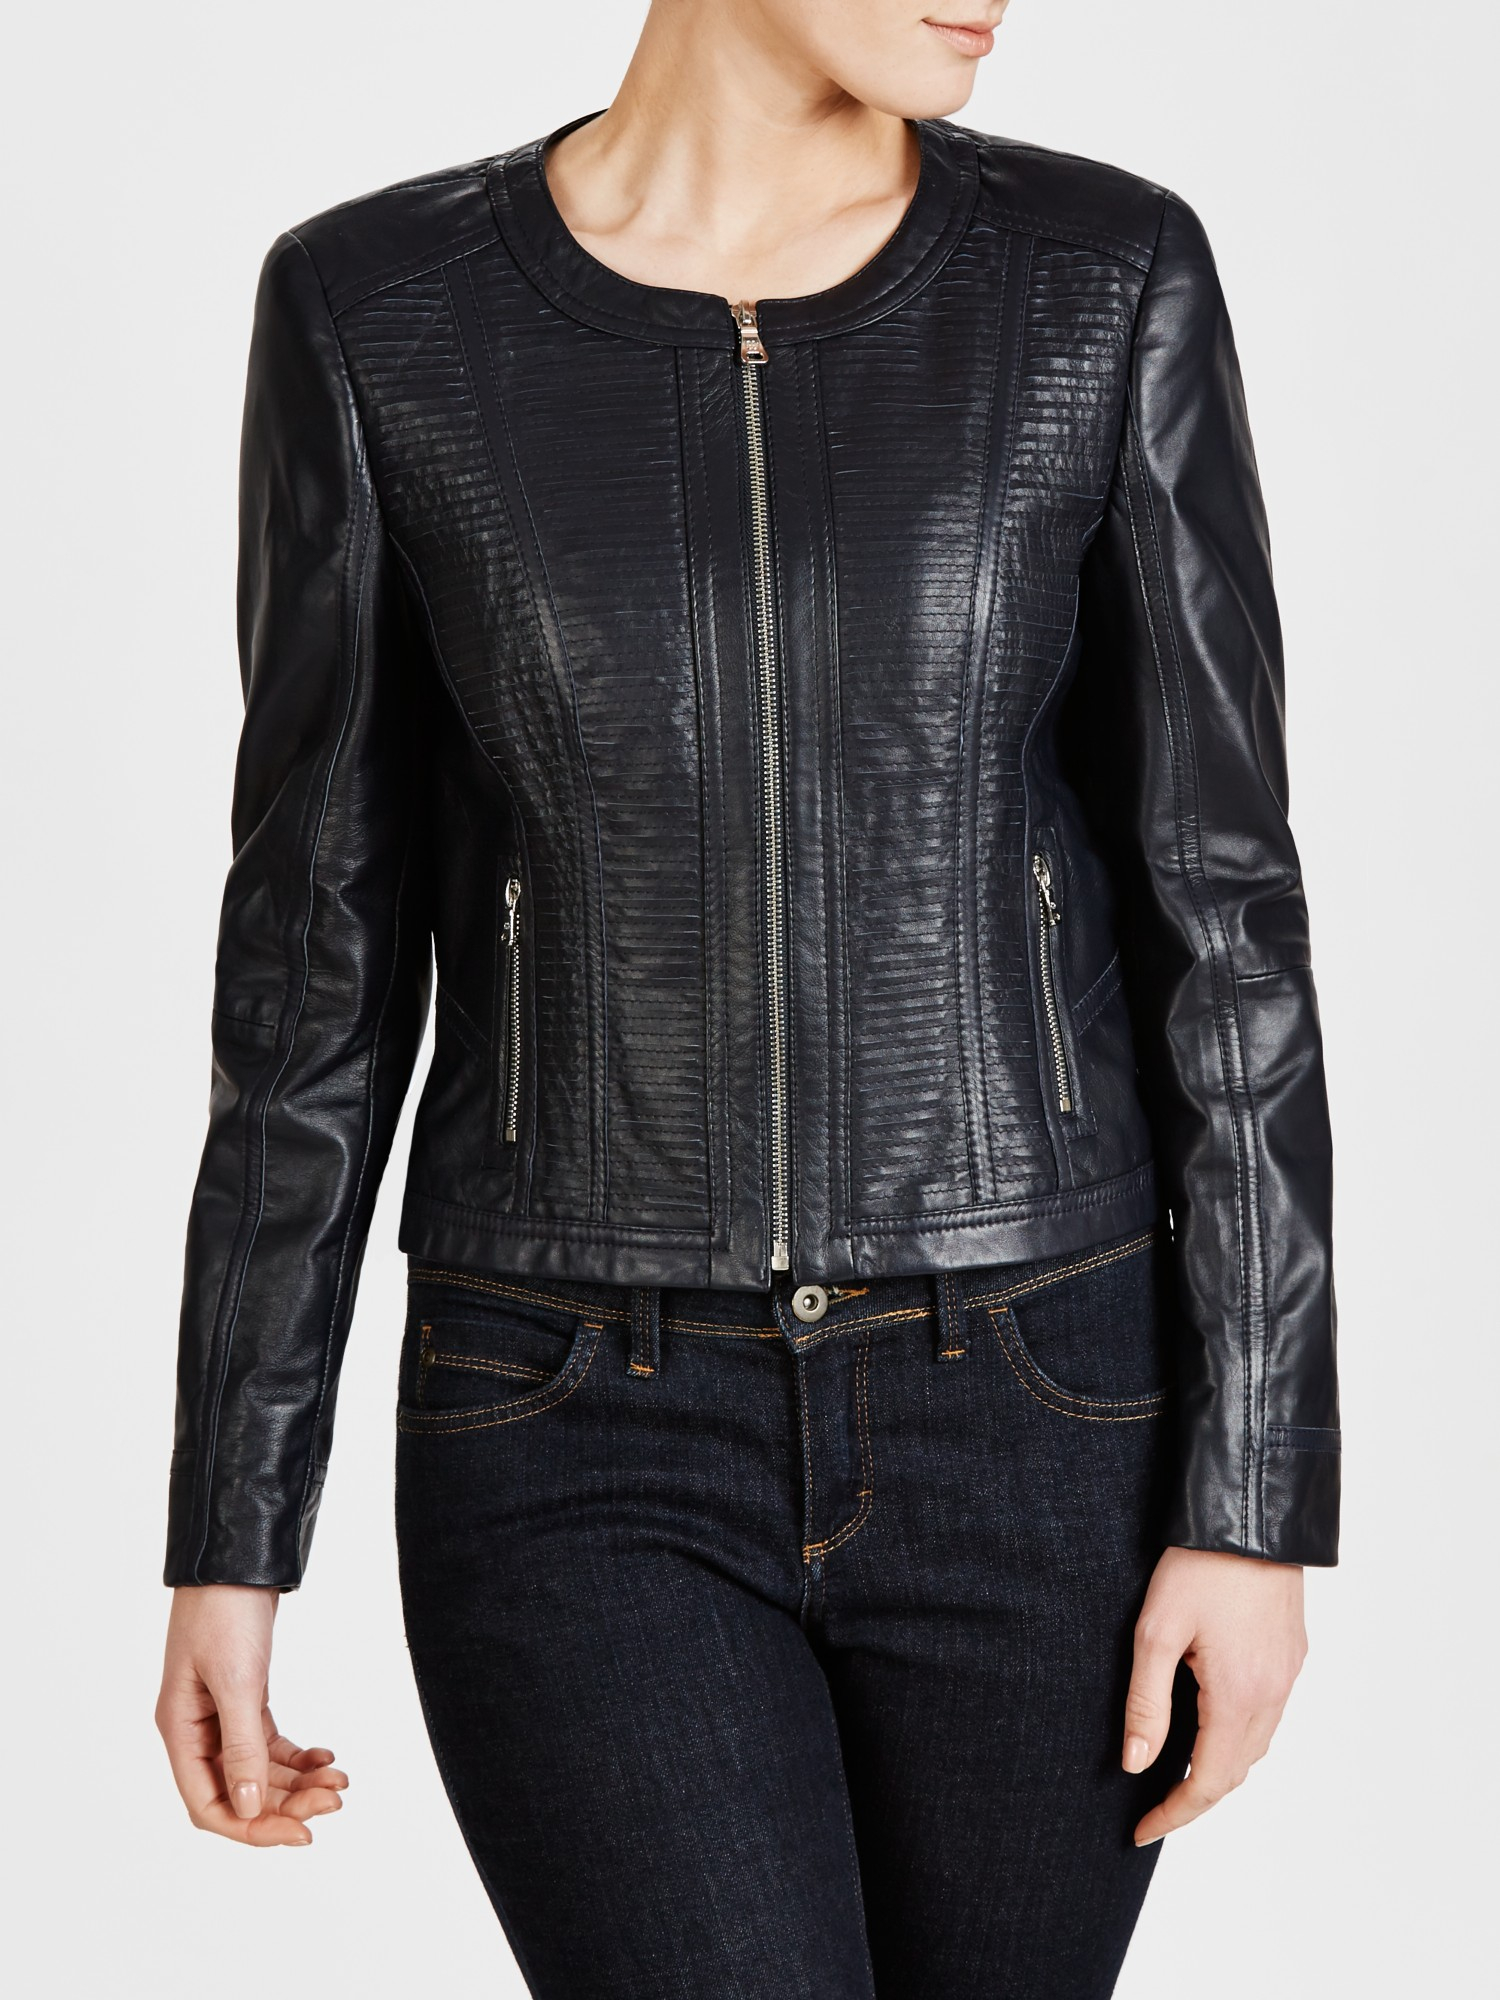 Gerry Weber Leather Jacket in Black - Lyst